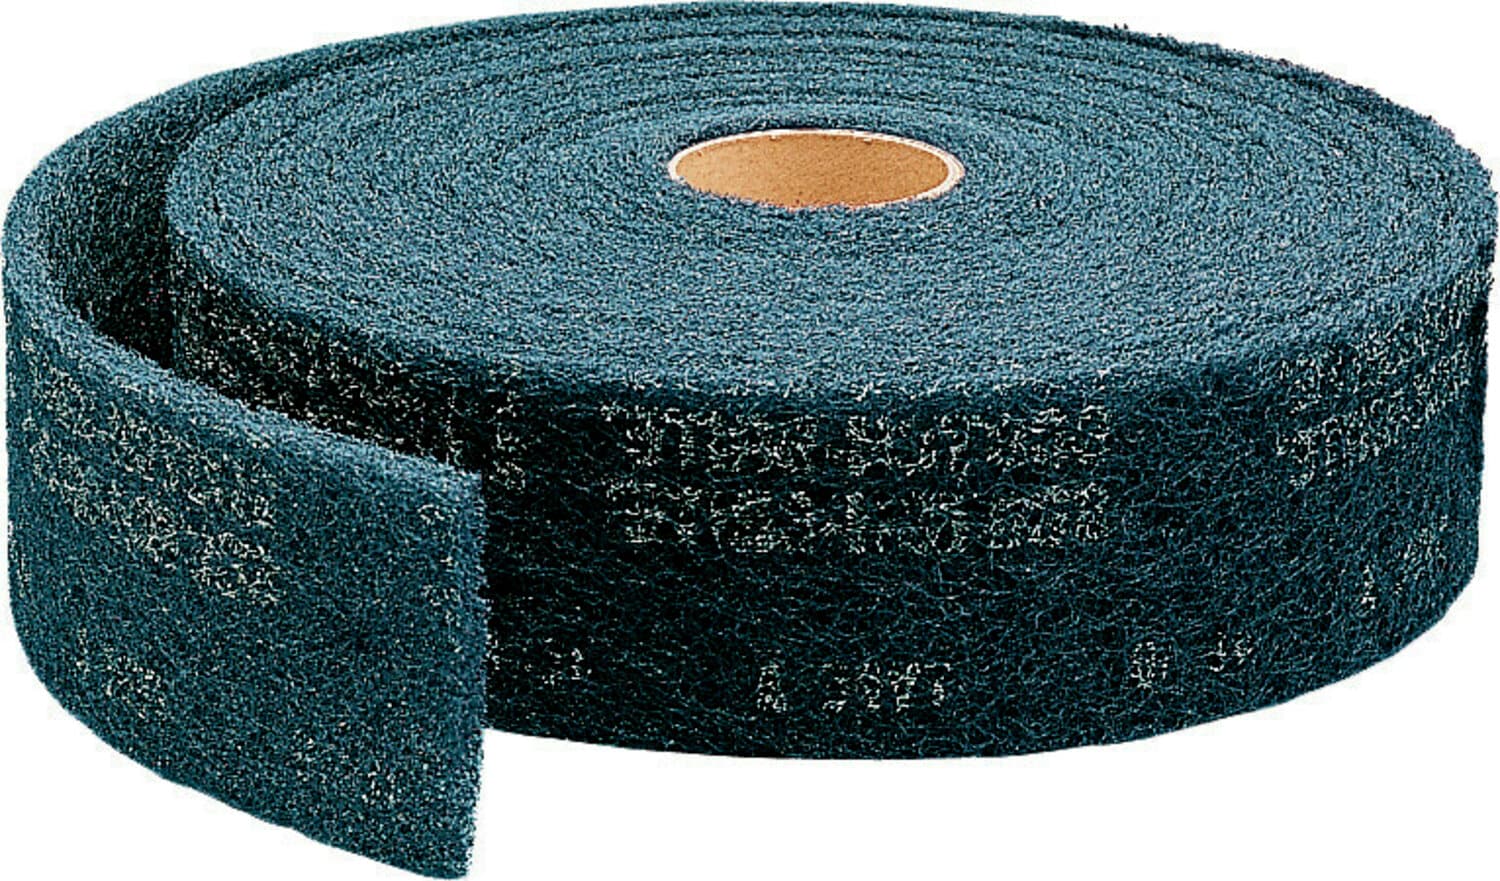 7010366278 - Scotch-Brite Surface Conditioning Roll, SC-RL, A/O Very Fine, 12 in x
30 ft, 1 ea/Case